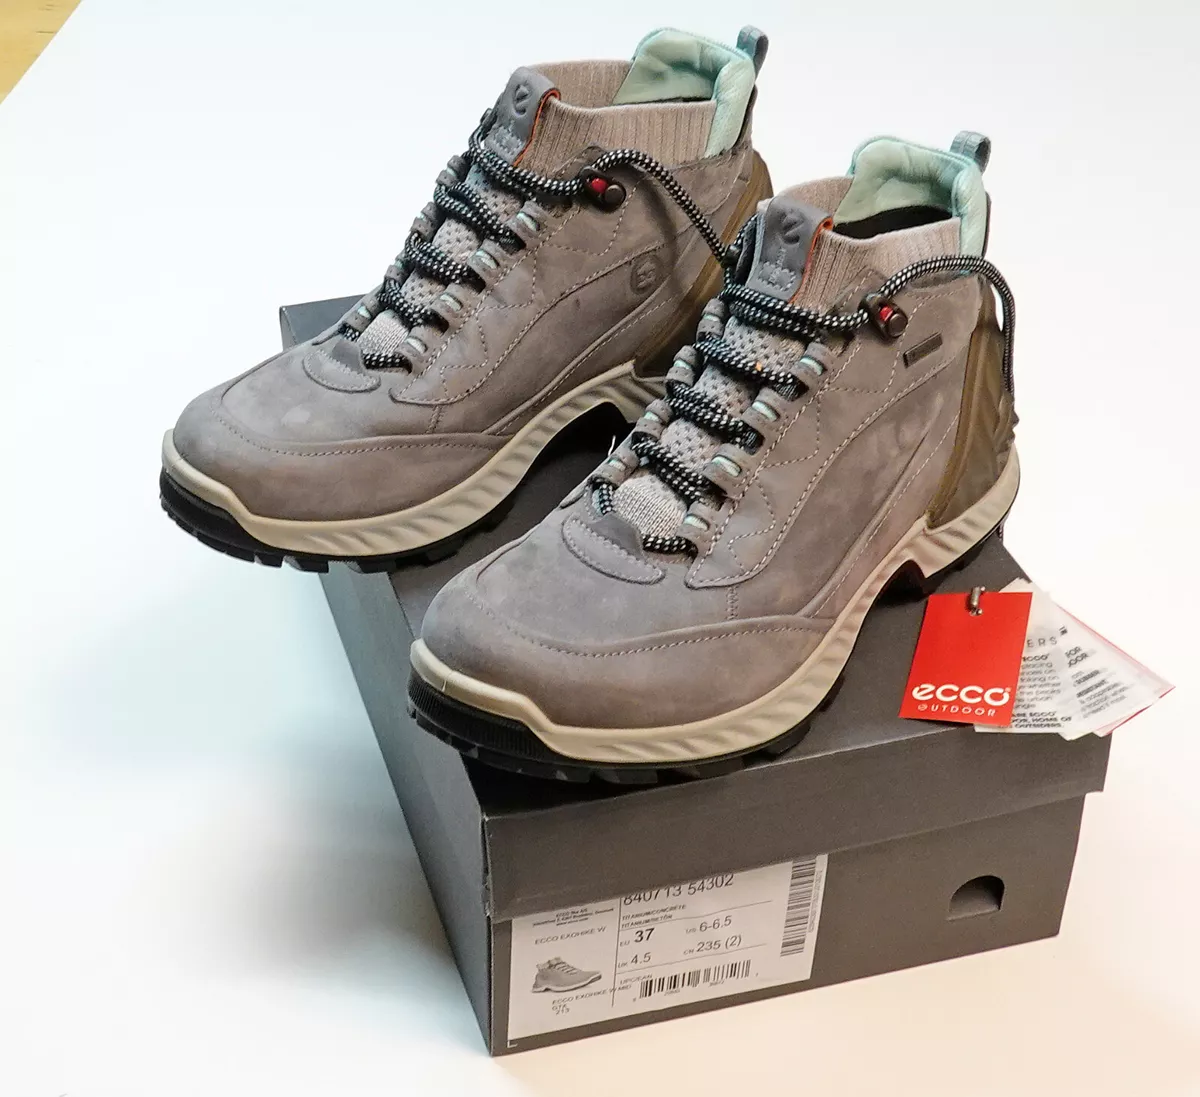 Spænding digtere Sammentræf ECCO Women&#039;s Exohike High Gore-tex Hiking Boot • Size 6.5 or EU 37 |  eBay